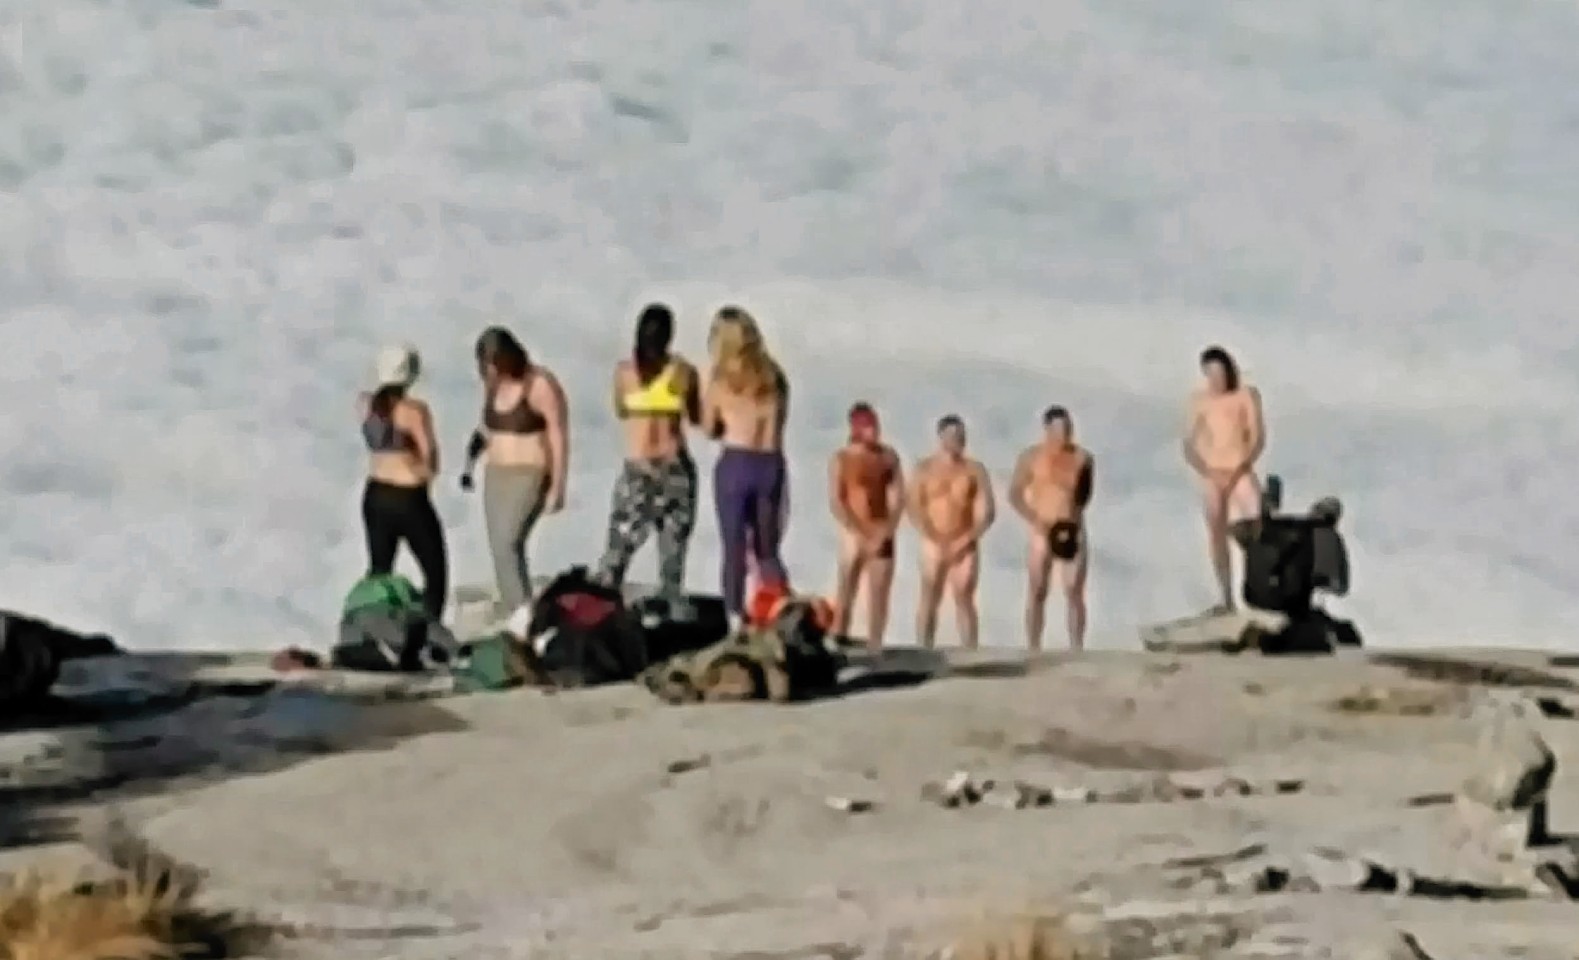 The group of tourists allegedly stripped naked before taking pictures on a mountain peak.